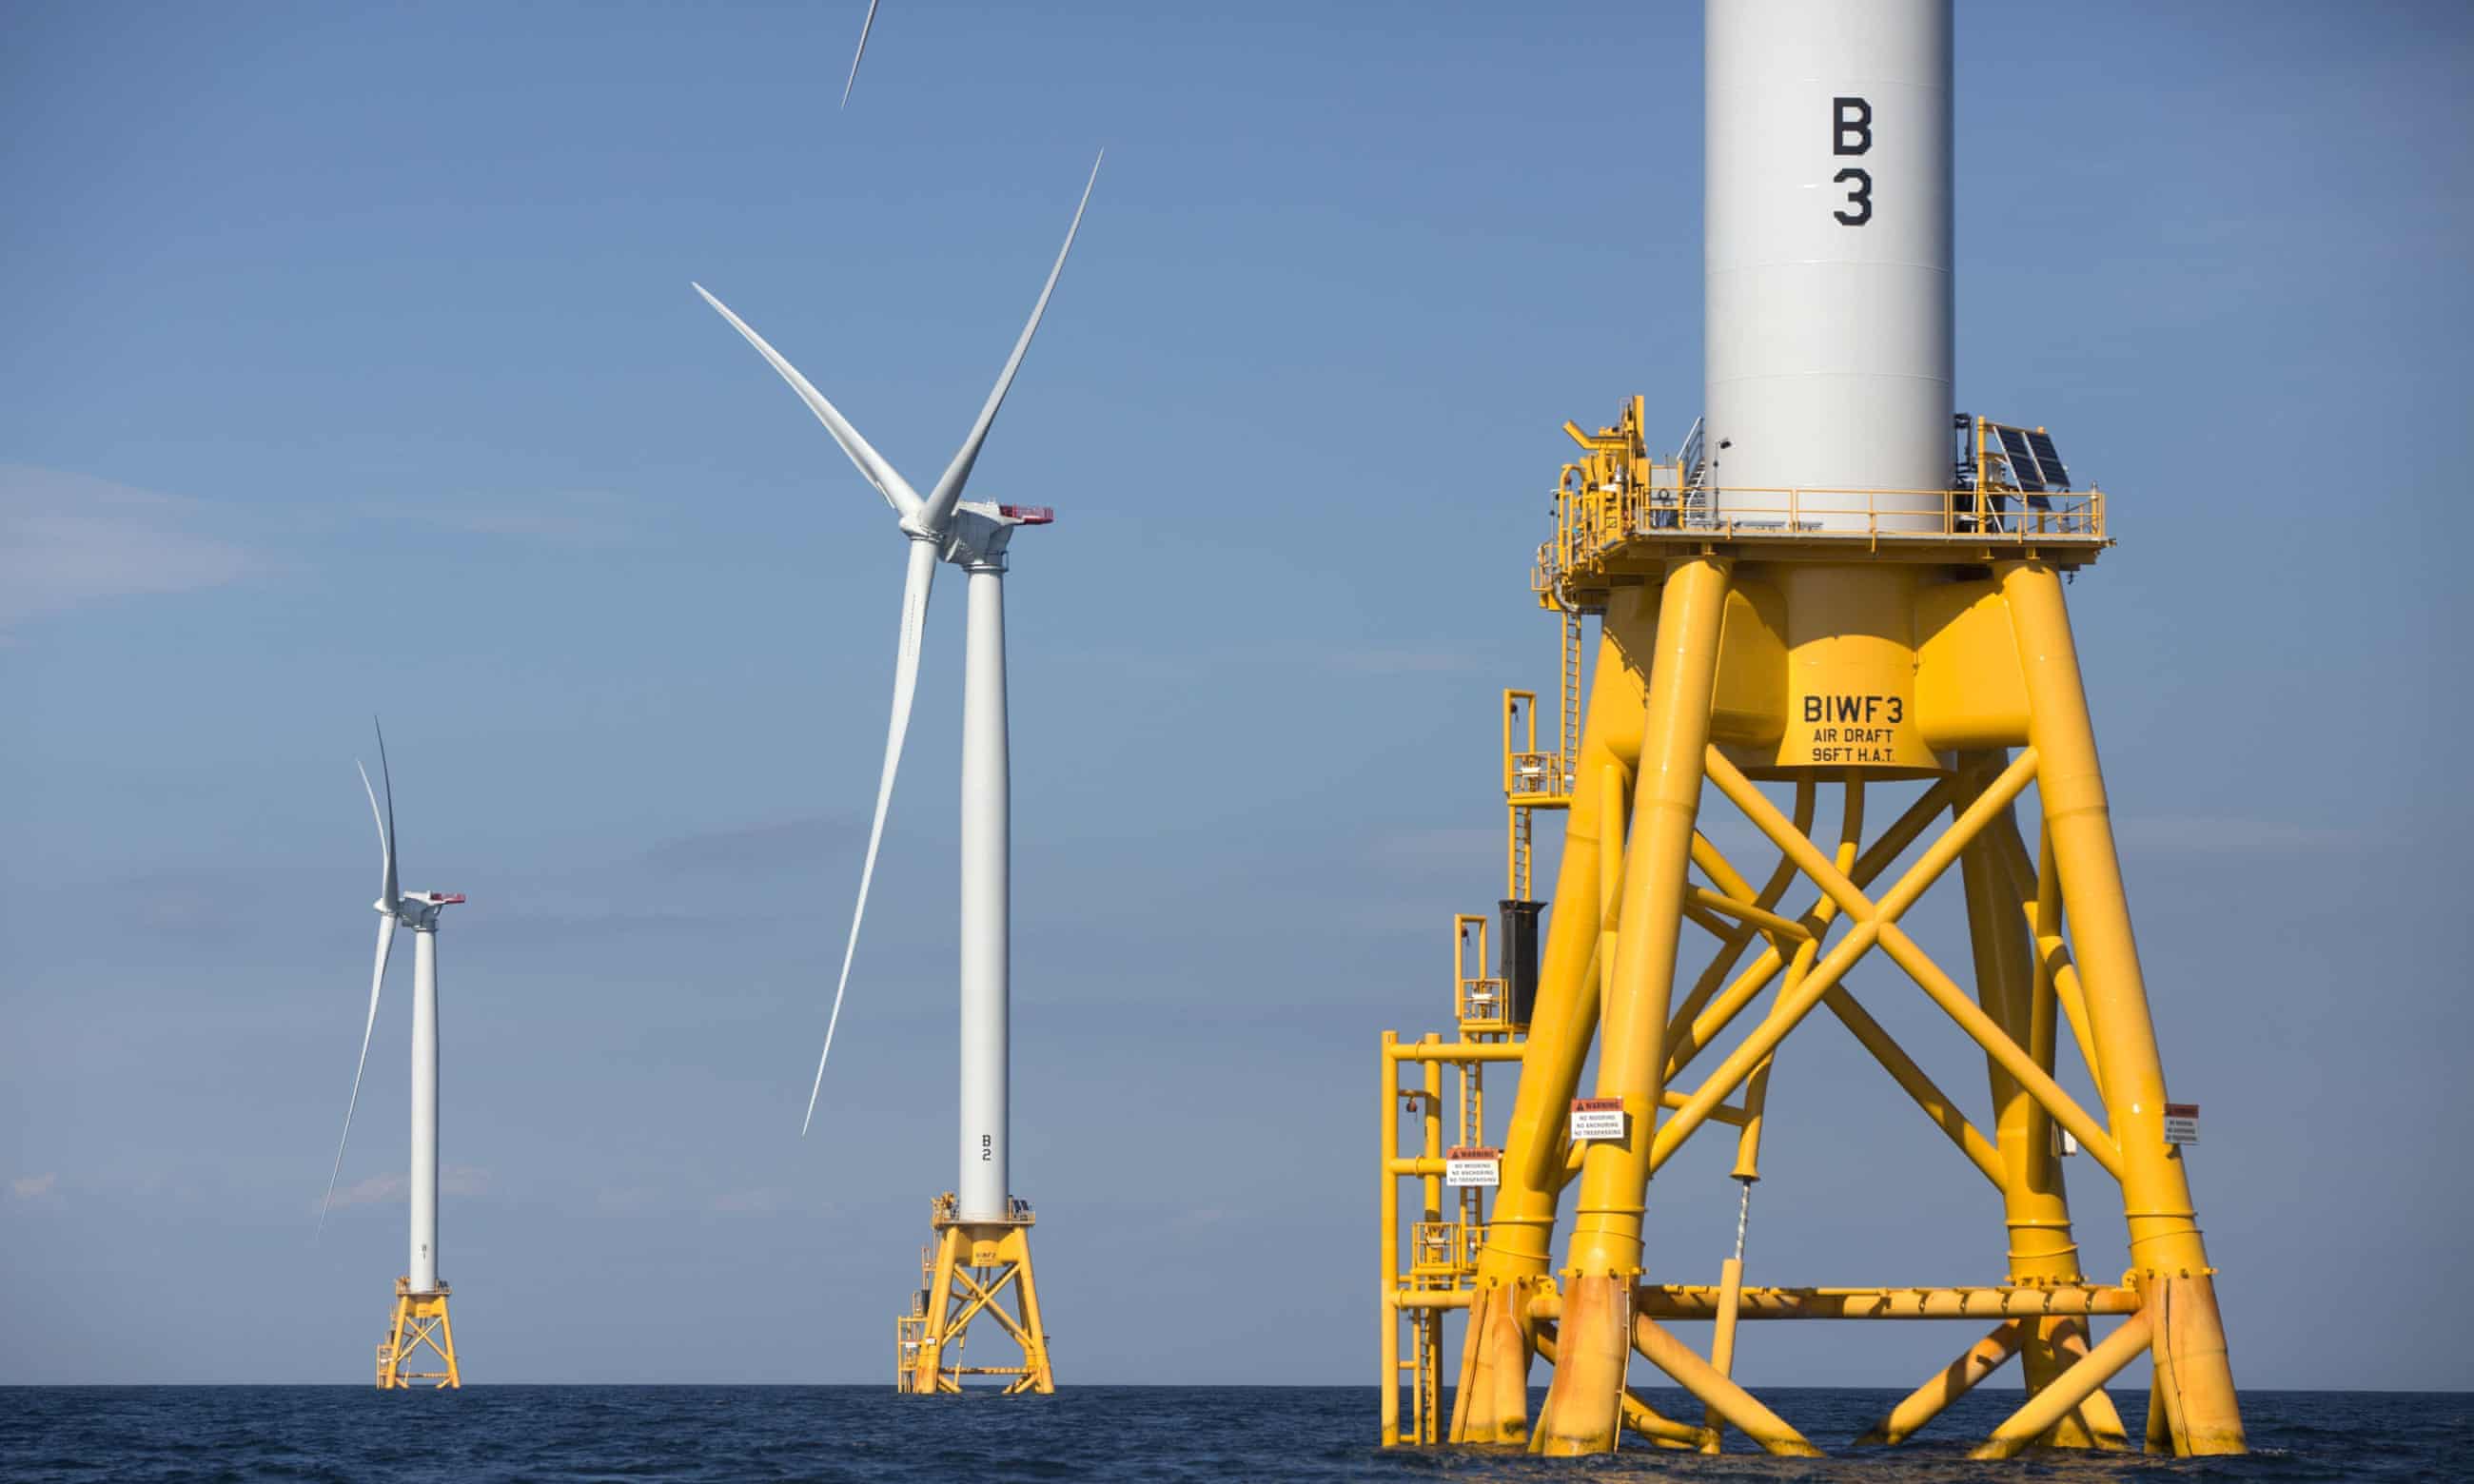 How ocean wind power could help the US fossil fuel industry (theguardian.com)